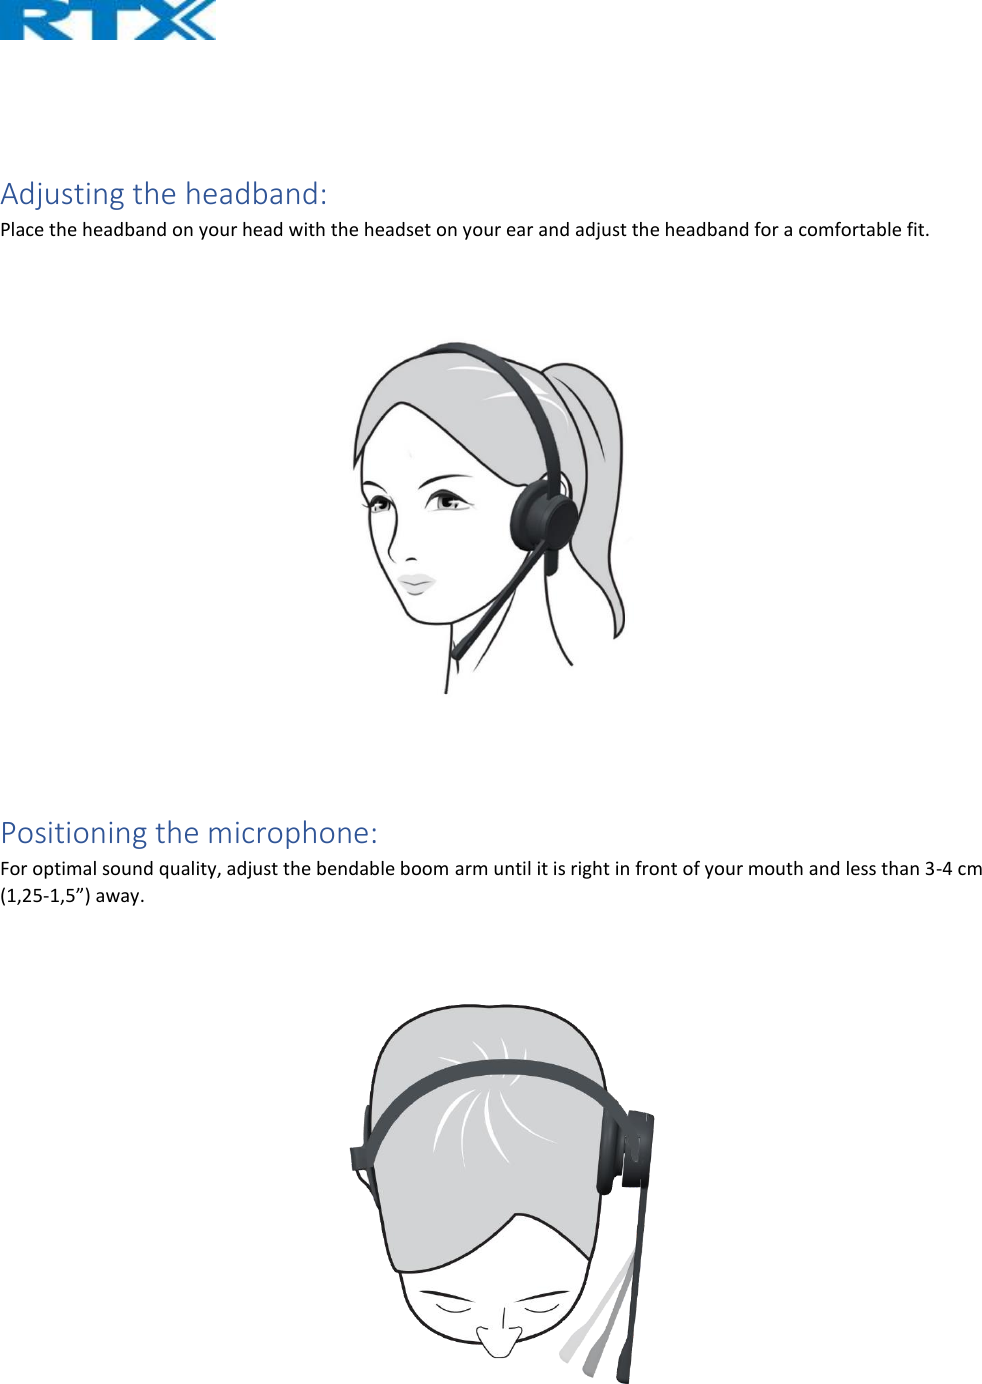    Adjusting the headband: Place the headband on your head with the headset on your ear and adjust the headband for a comfortable fit.   Positioning the microphone: For optimal sound quality, adjust the bendable boom arm until it is right in front of your mouth and less than 3-4 cm (1,25-1,5”) away.  